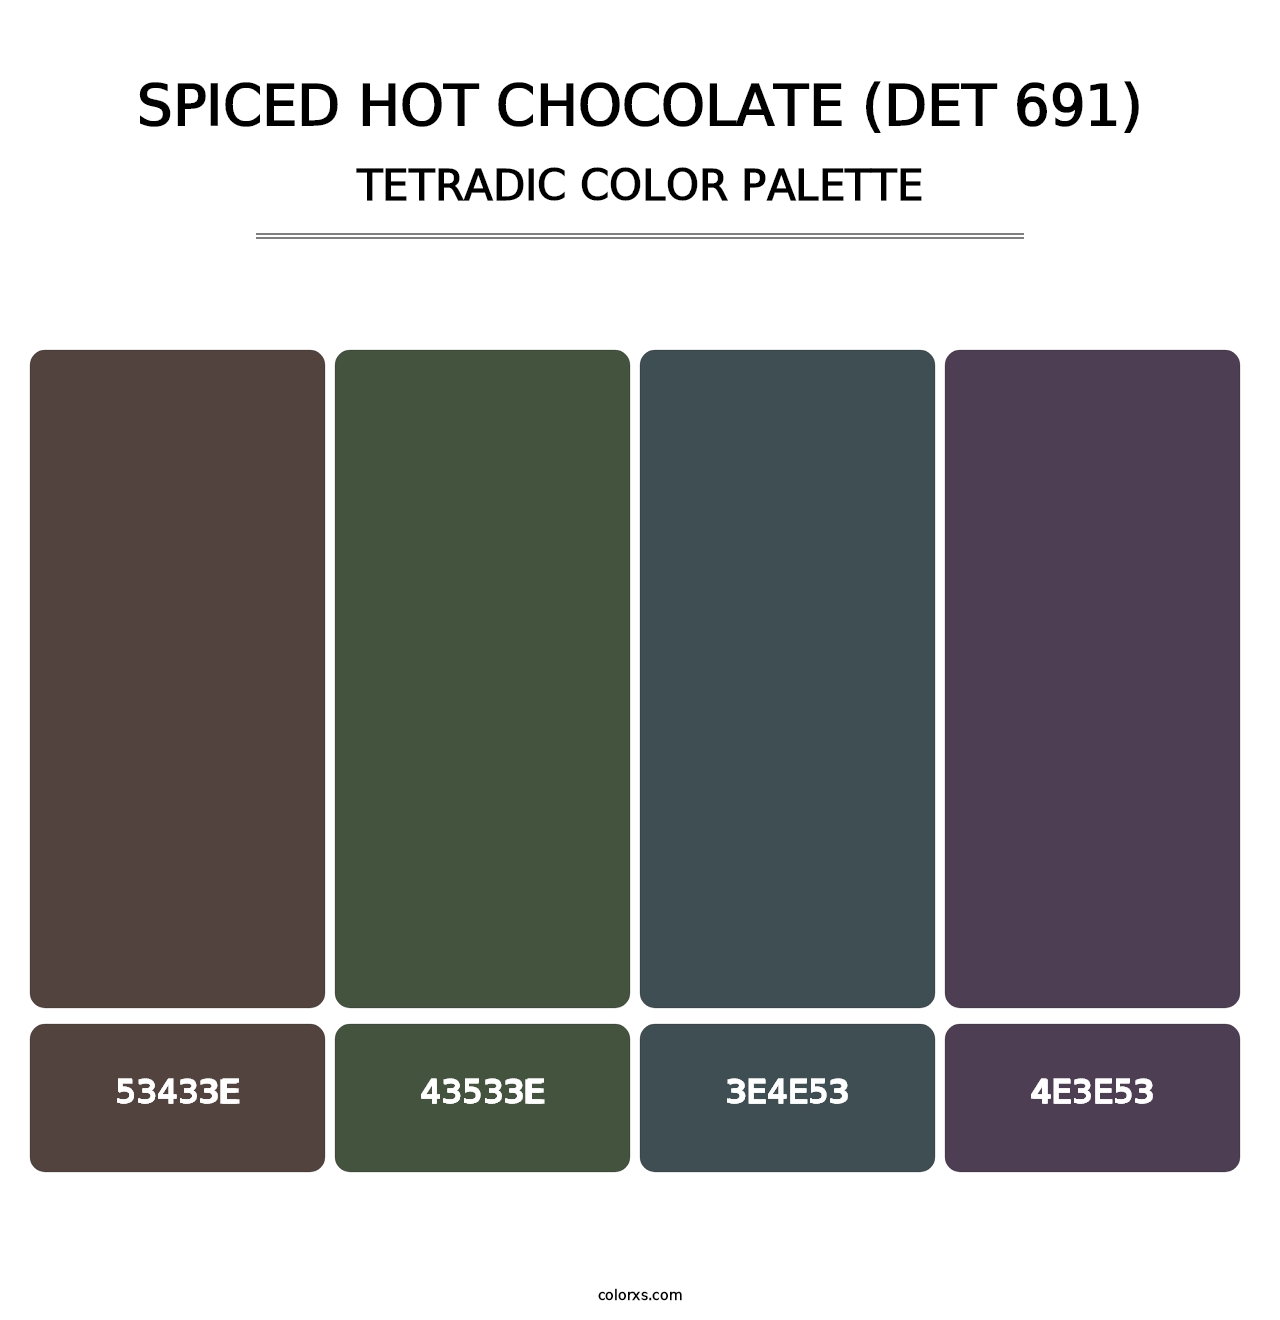 Spiced Hot Chocolate (DET 691) - Tetradic Color Palette